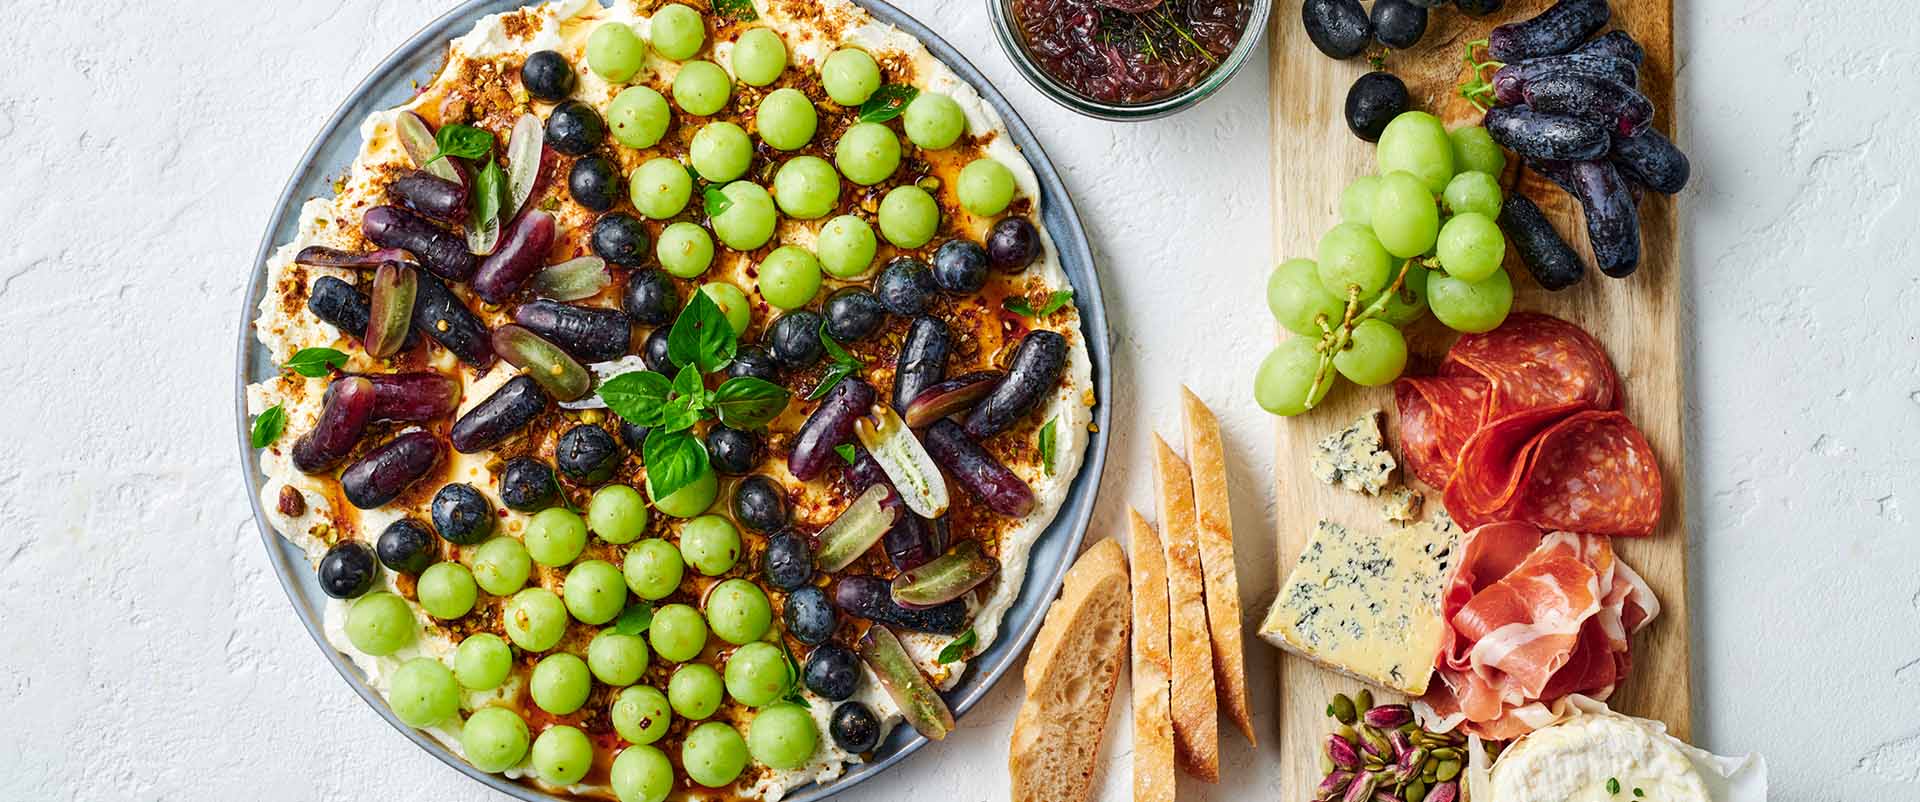 Shared Perfection grape, labneh and dukkah platter Recipe 